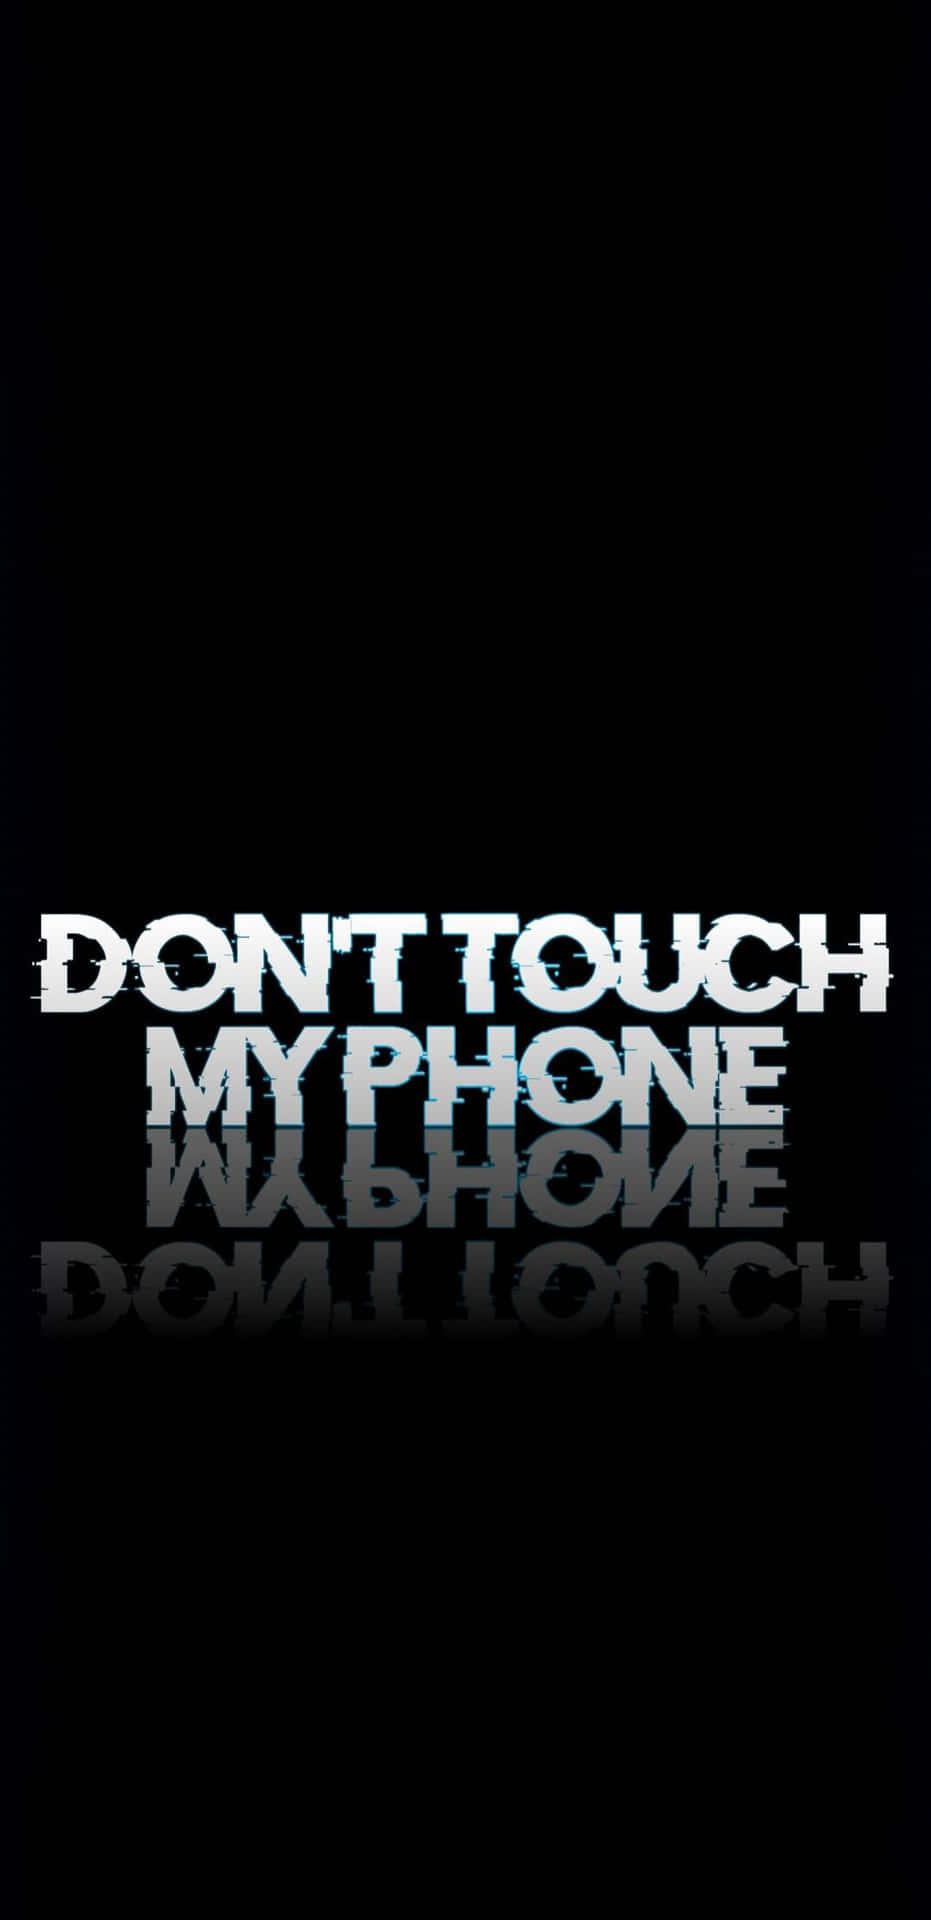 Don't Touch My Phone - Wallpaper Background